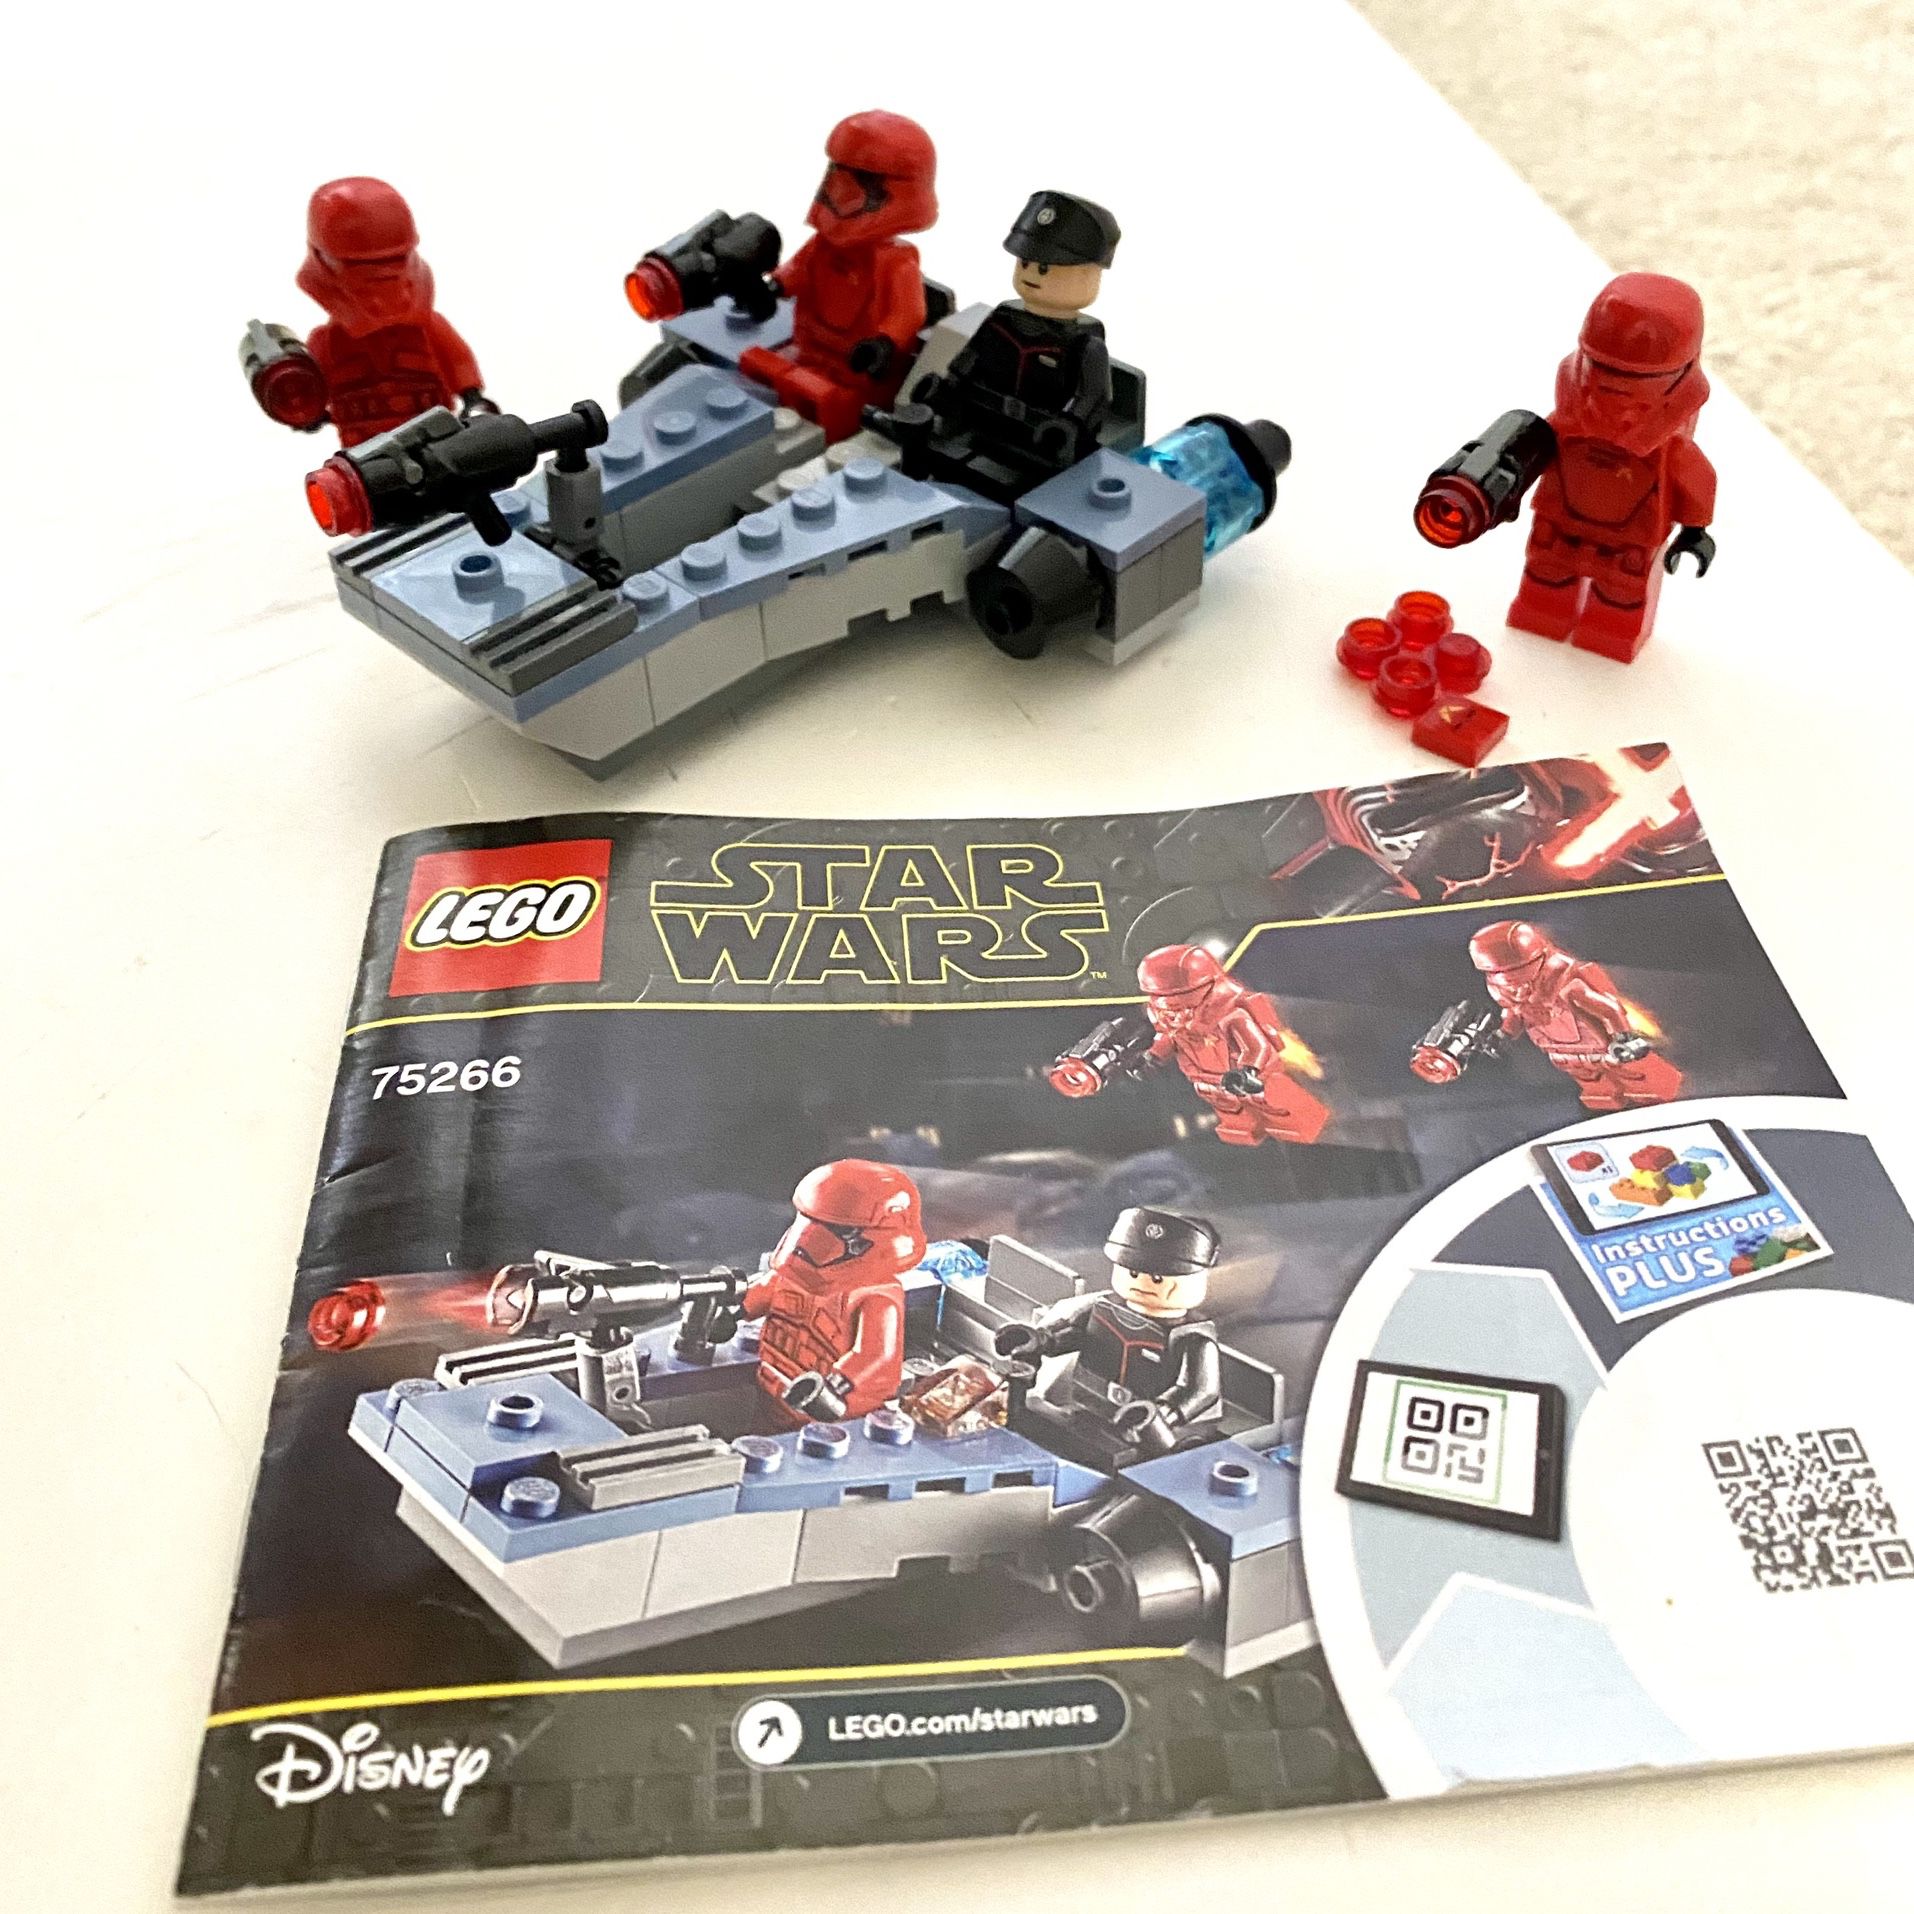 Prevail Gud biograf LEGO 75266 Star Wars Sith Troopers Battle Pack for Sale in Willow Spring,  NC - OfferUp